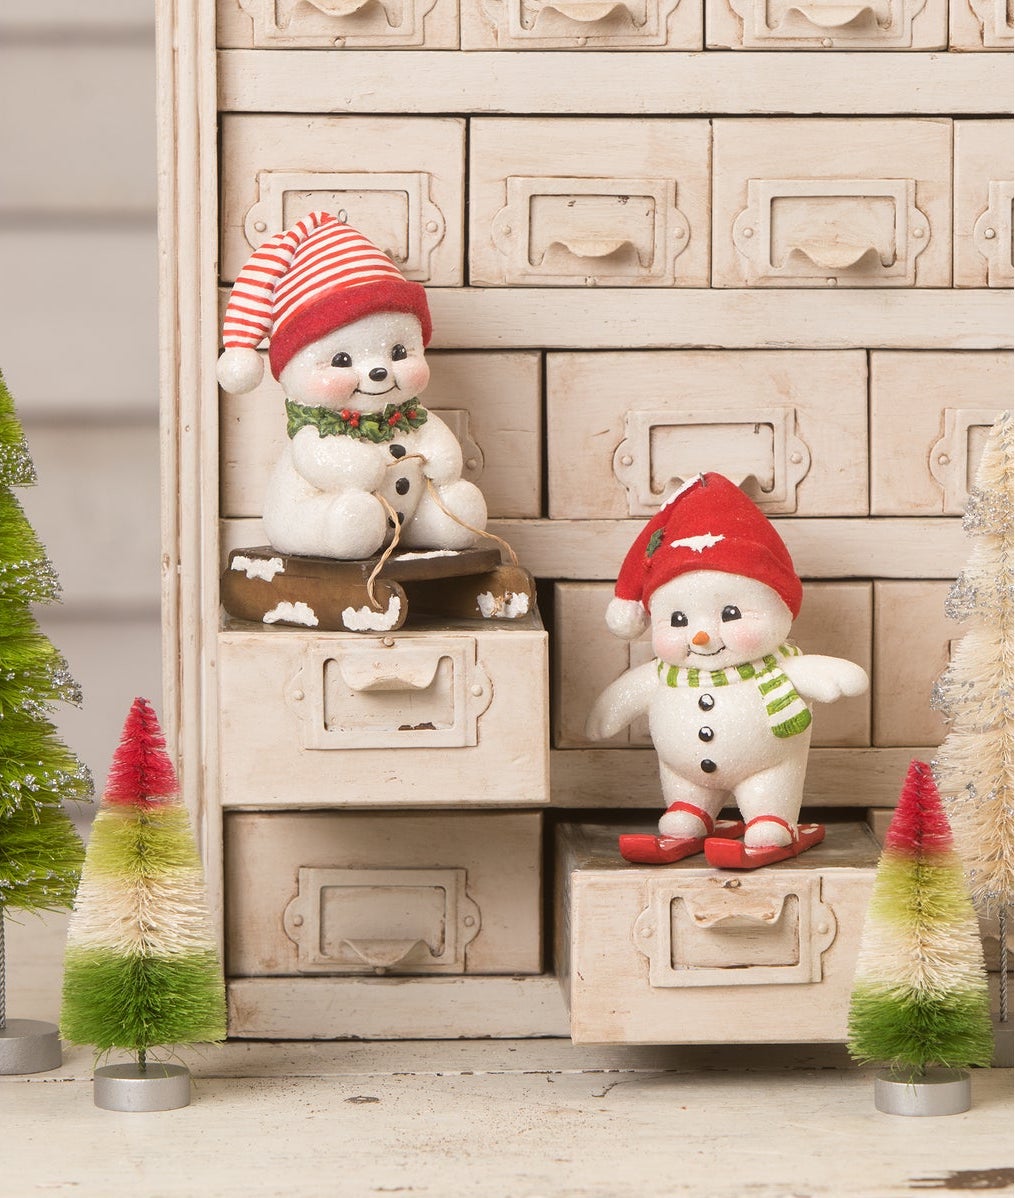 Cute Snowman Figurines, baby snowman sledding and skiing